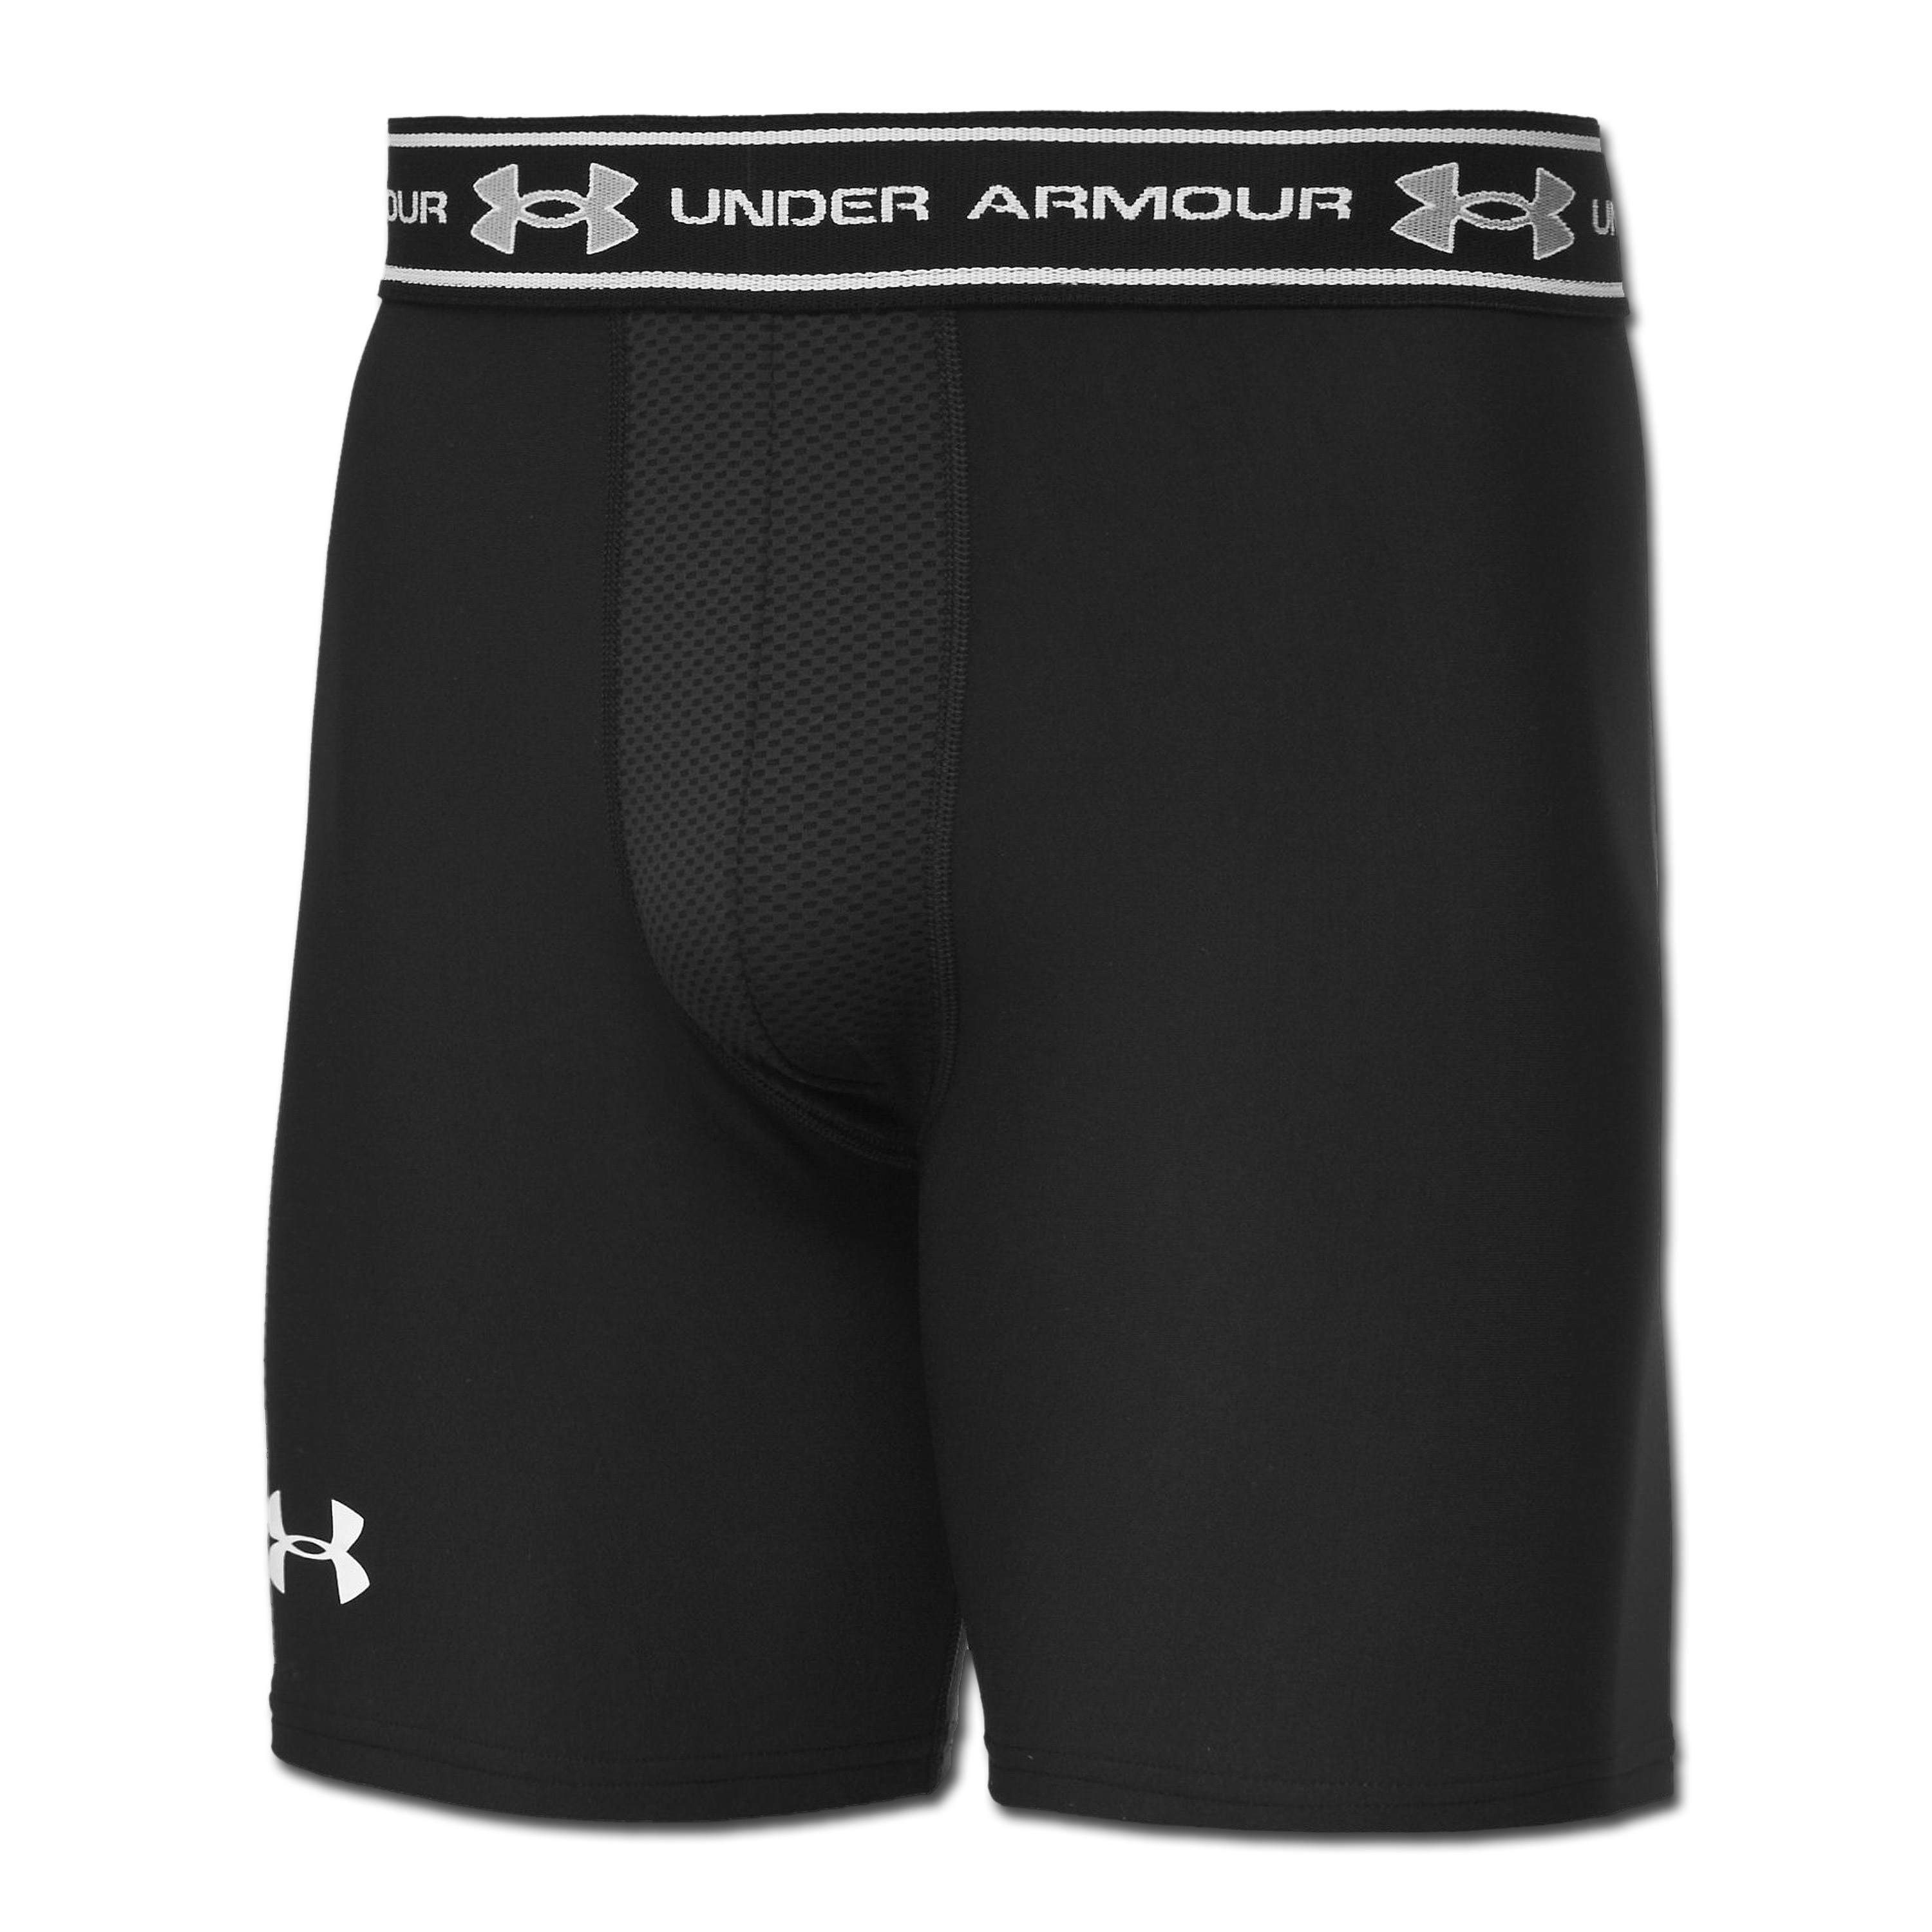 Compression Shorts Under Armour 